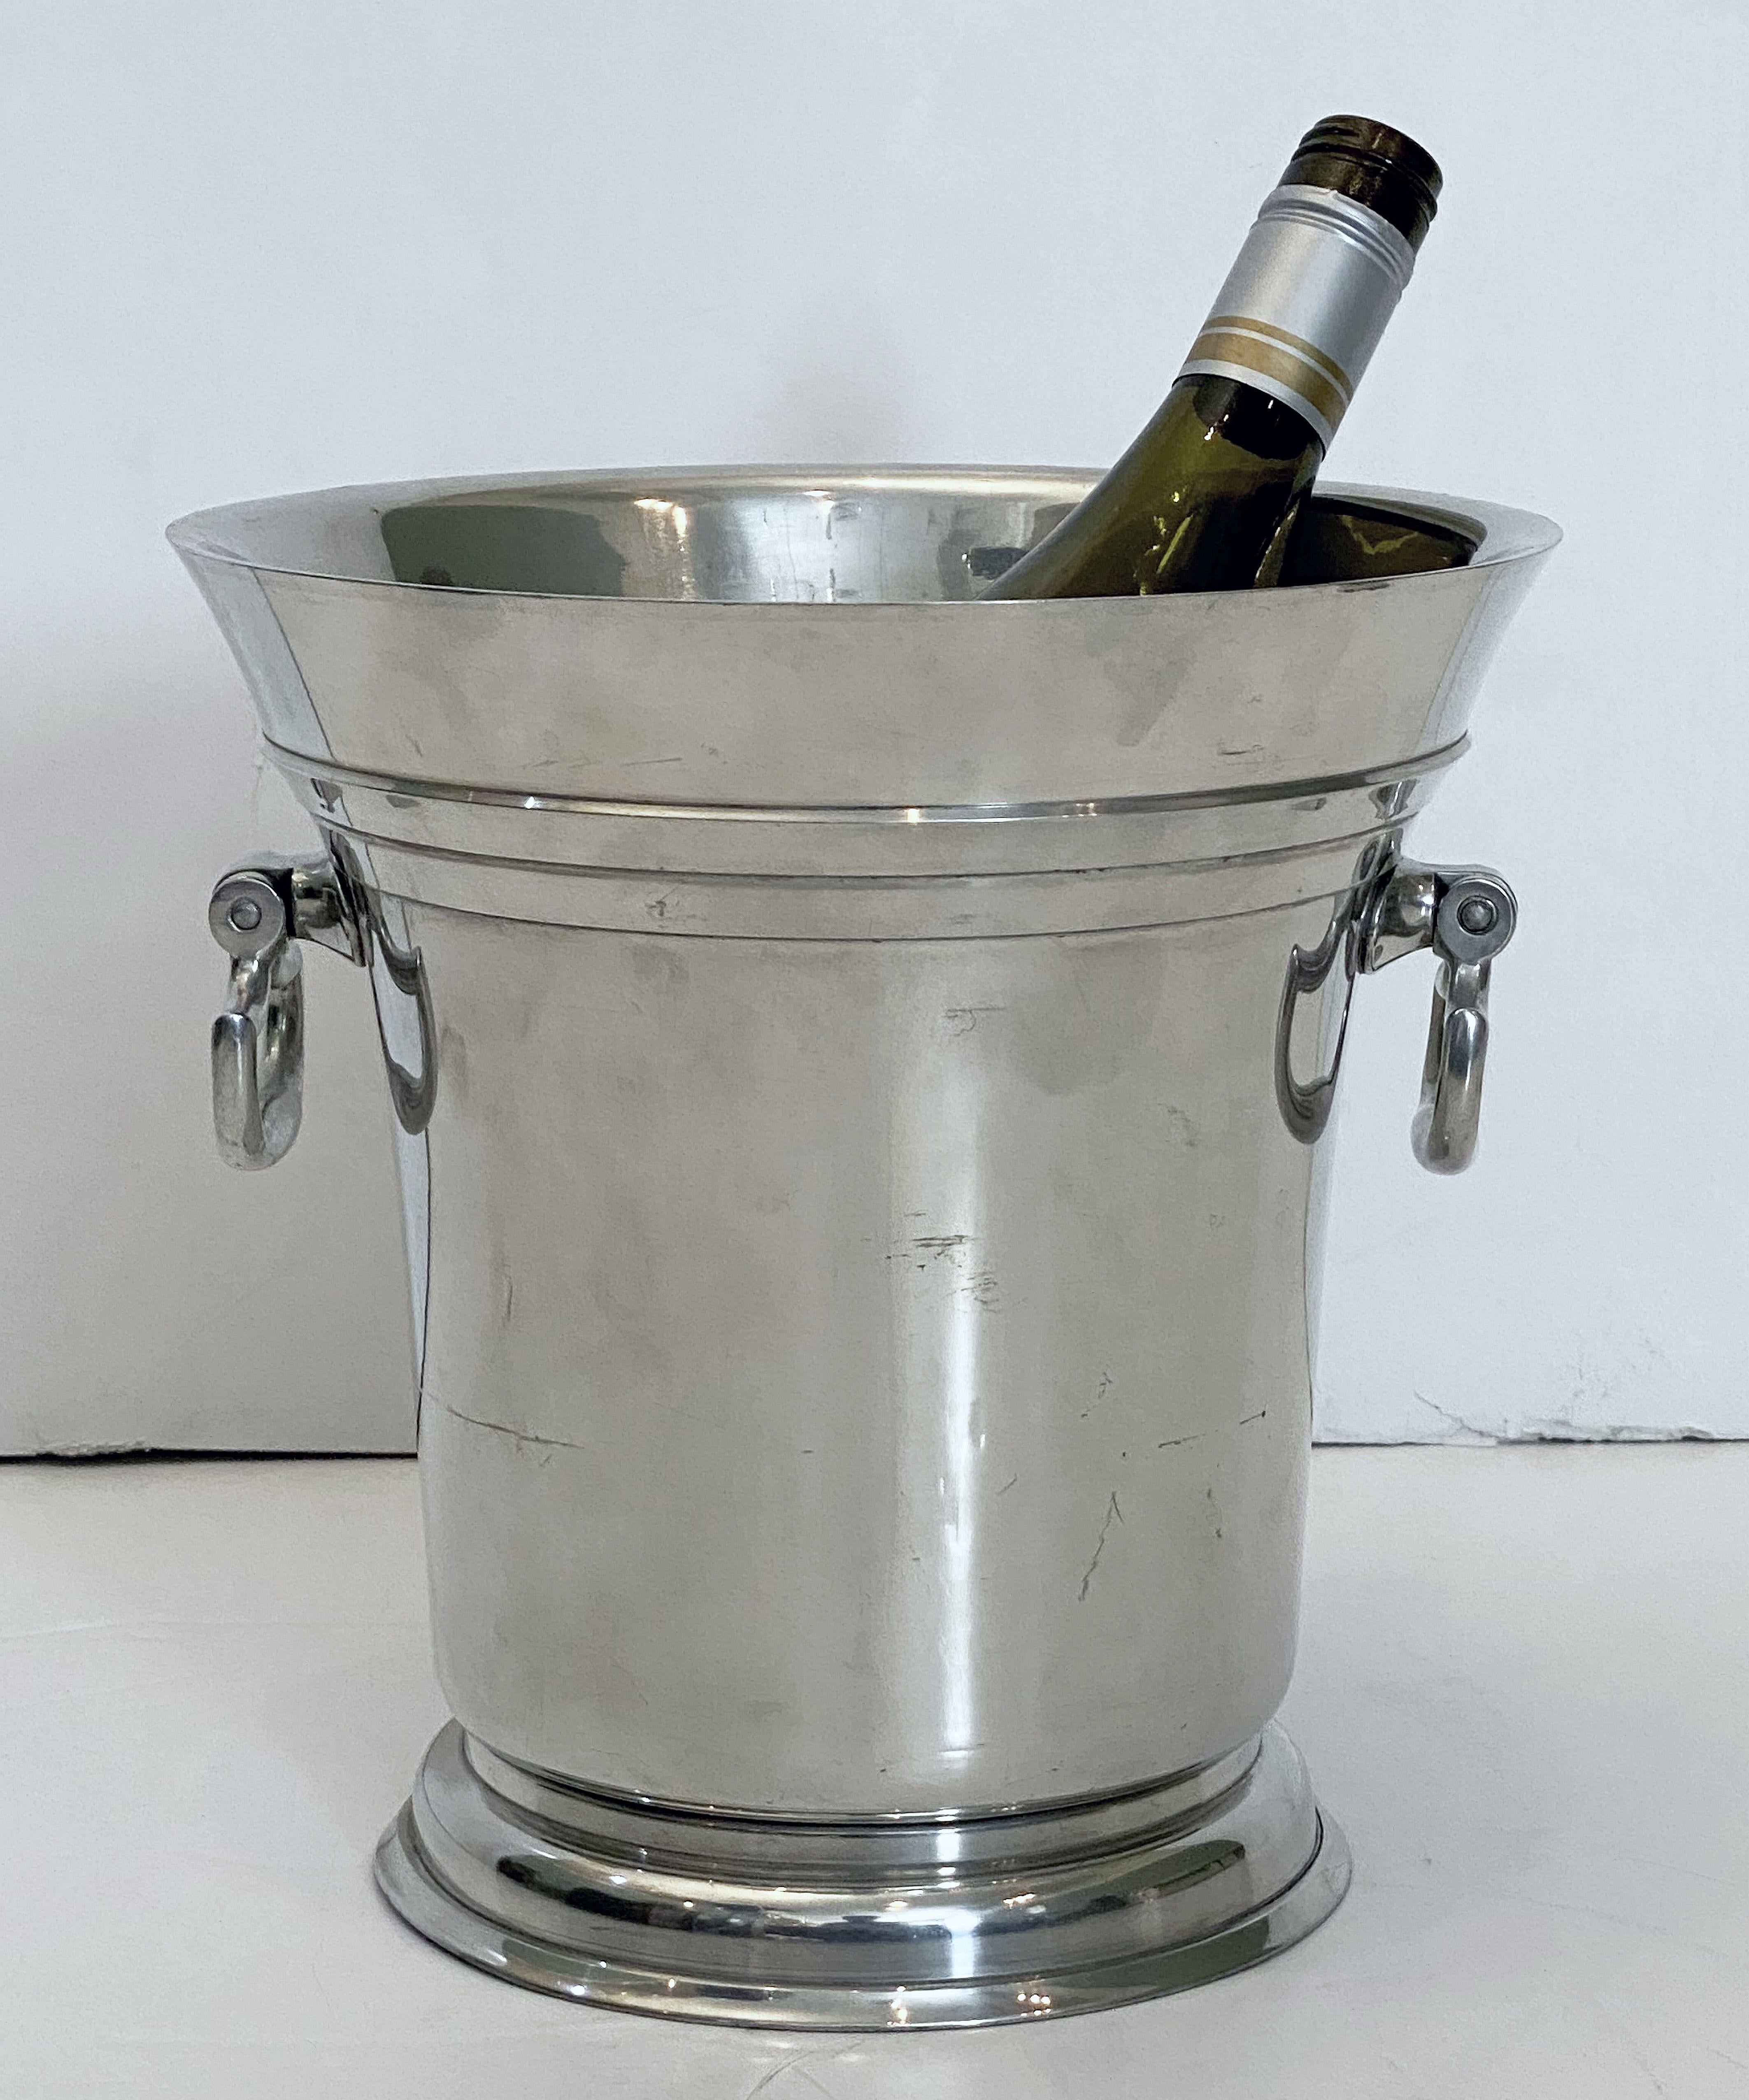 A large French champagne bucket in the Art Deco style, of a fine polished silver metal known as Etain alloy pewter, featuring a flared edge, opposing handles, and a raised platform base.